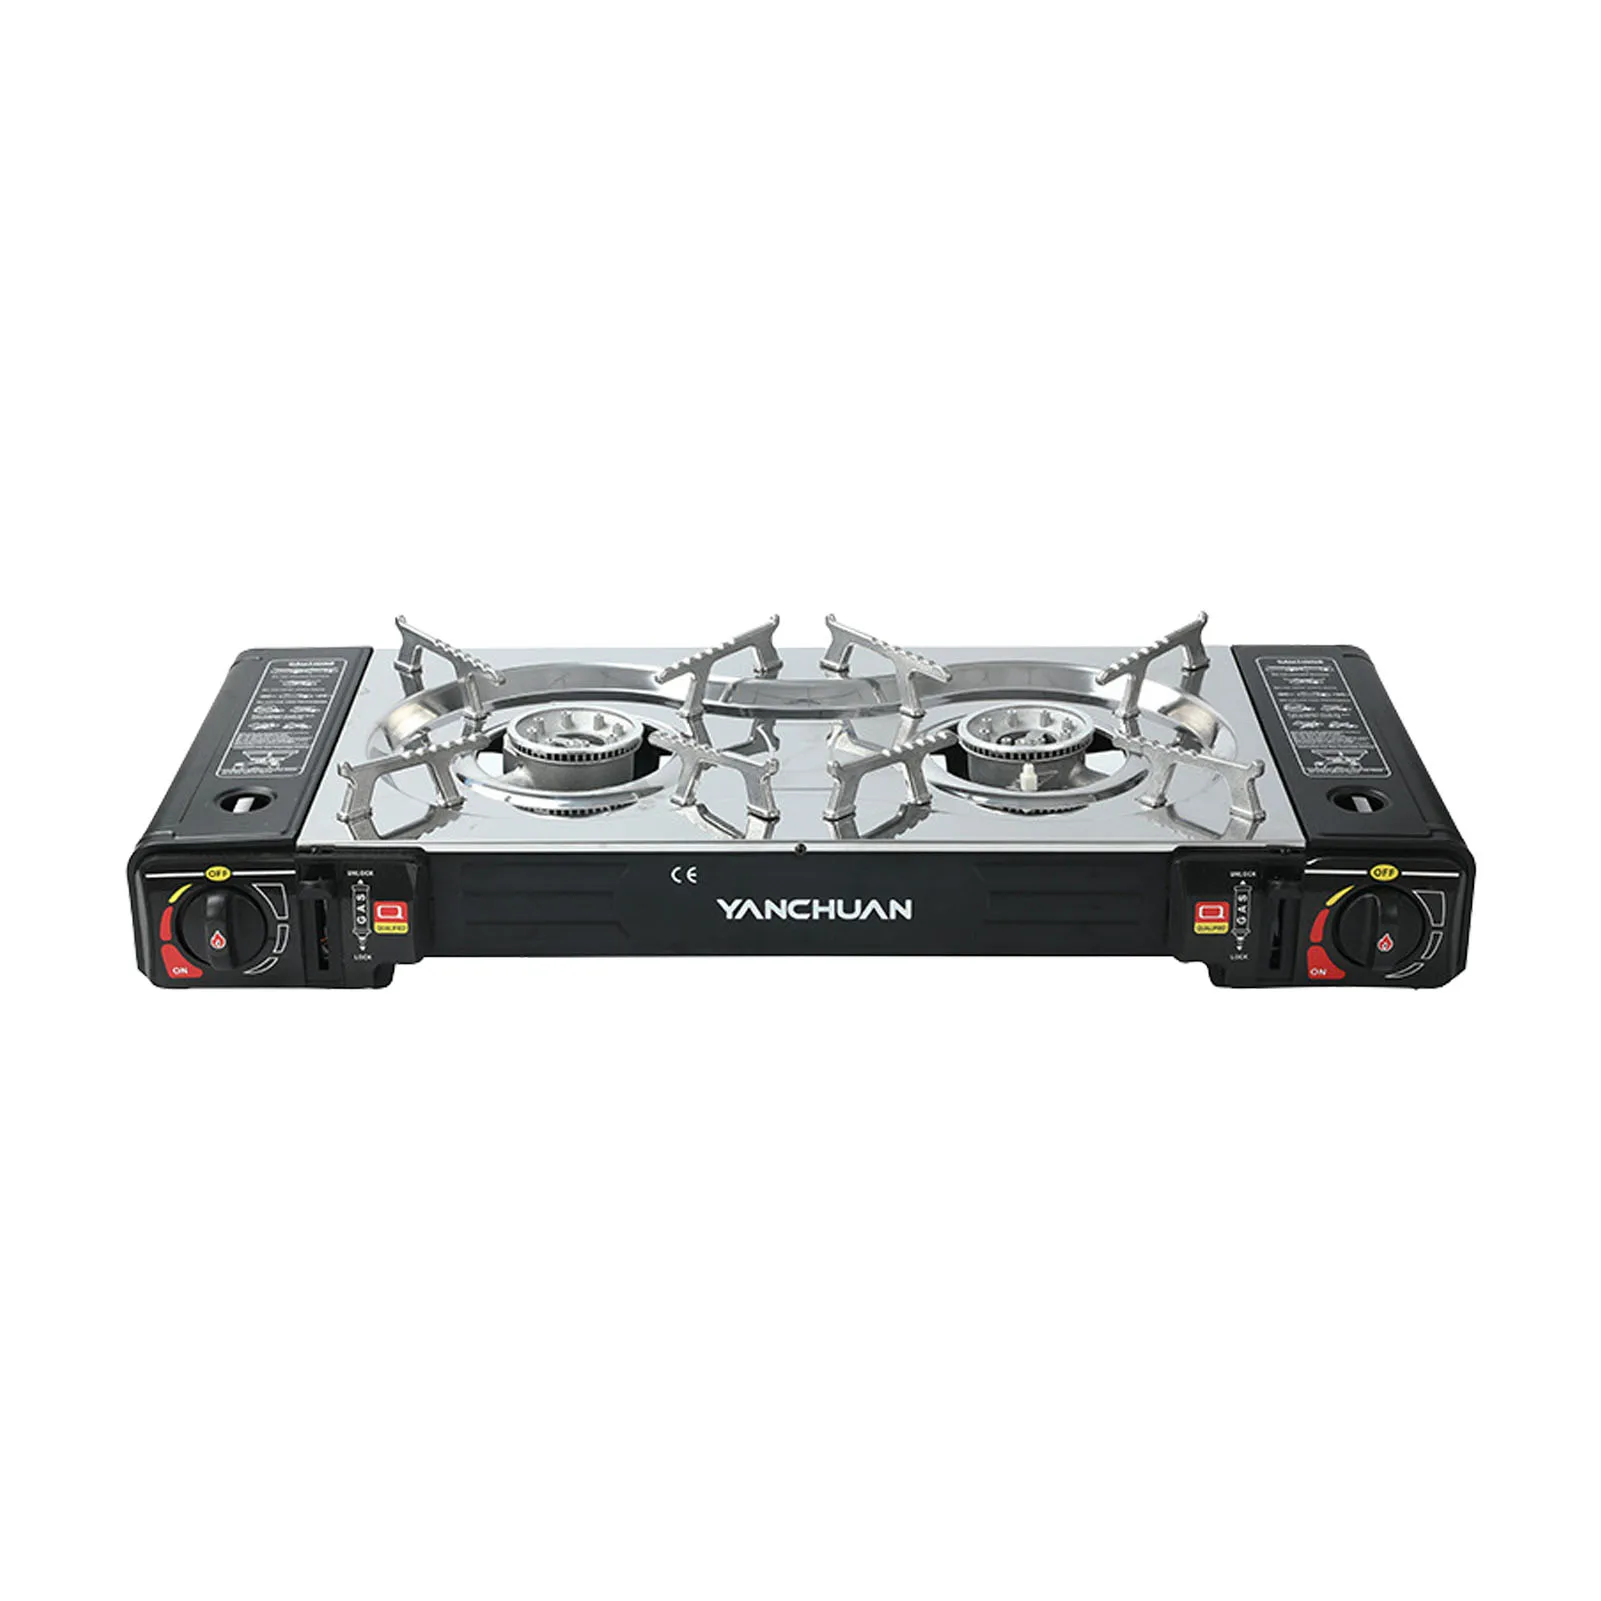 

Portable Gas Stove Strong And Durable Double Stove Cooktop Multiple Protection Small Gas Range Suitable For Outdoor Home